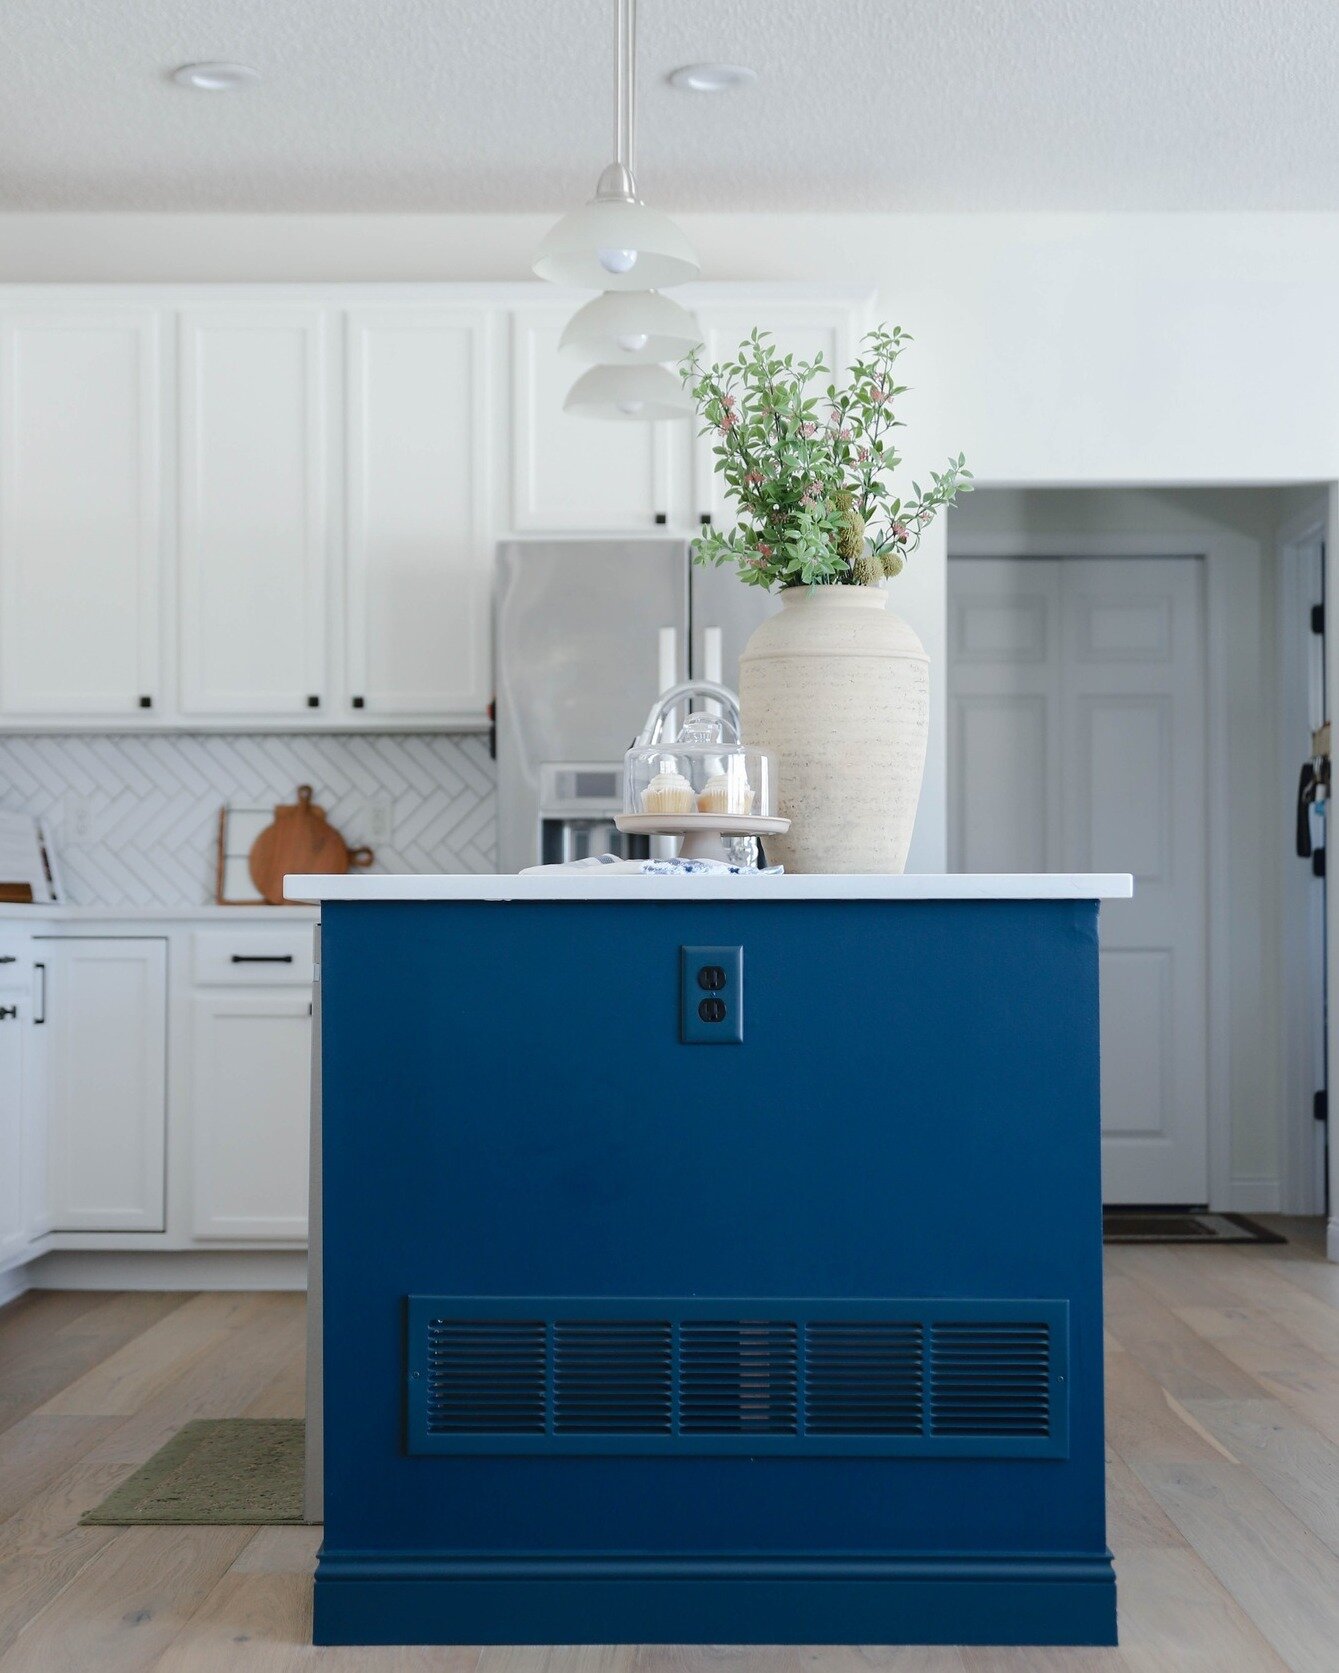 We hope you enjoy this newly remodeled kitchen! You have heard of an accent wall, how about an accent island? We love how this gorgeous blue island stands out against the classic custom white cabinets. New home, same address! 💚

Visit our website: w